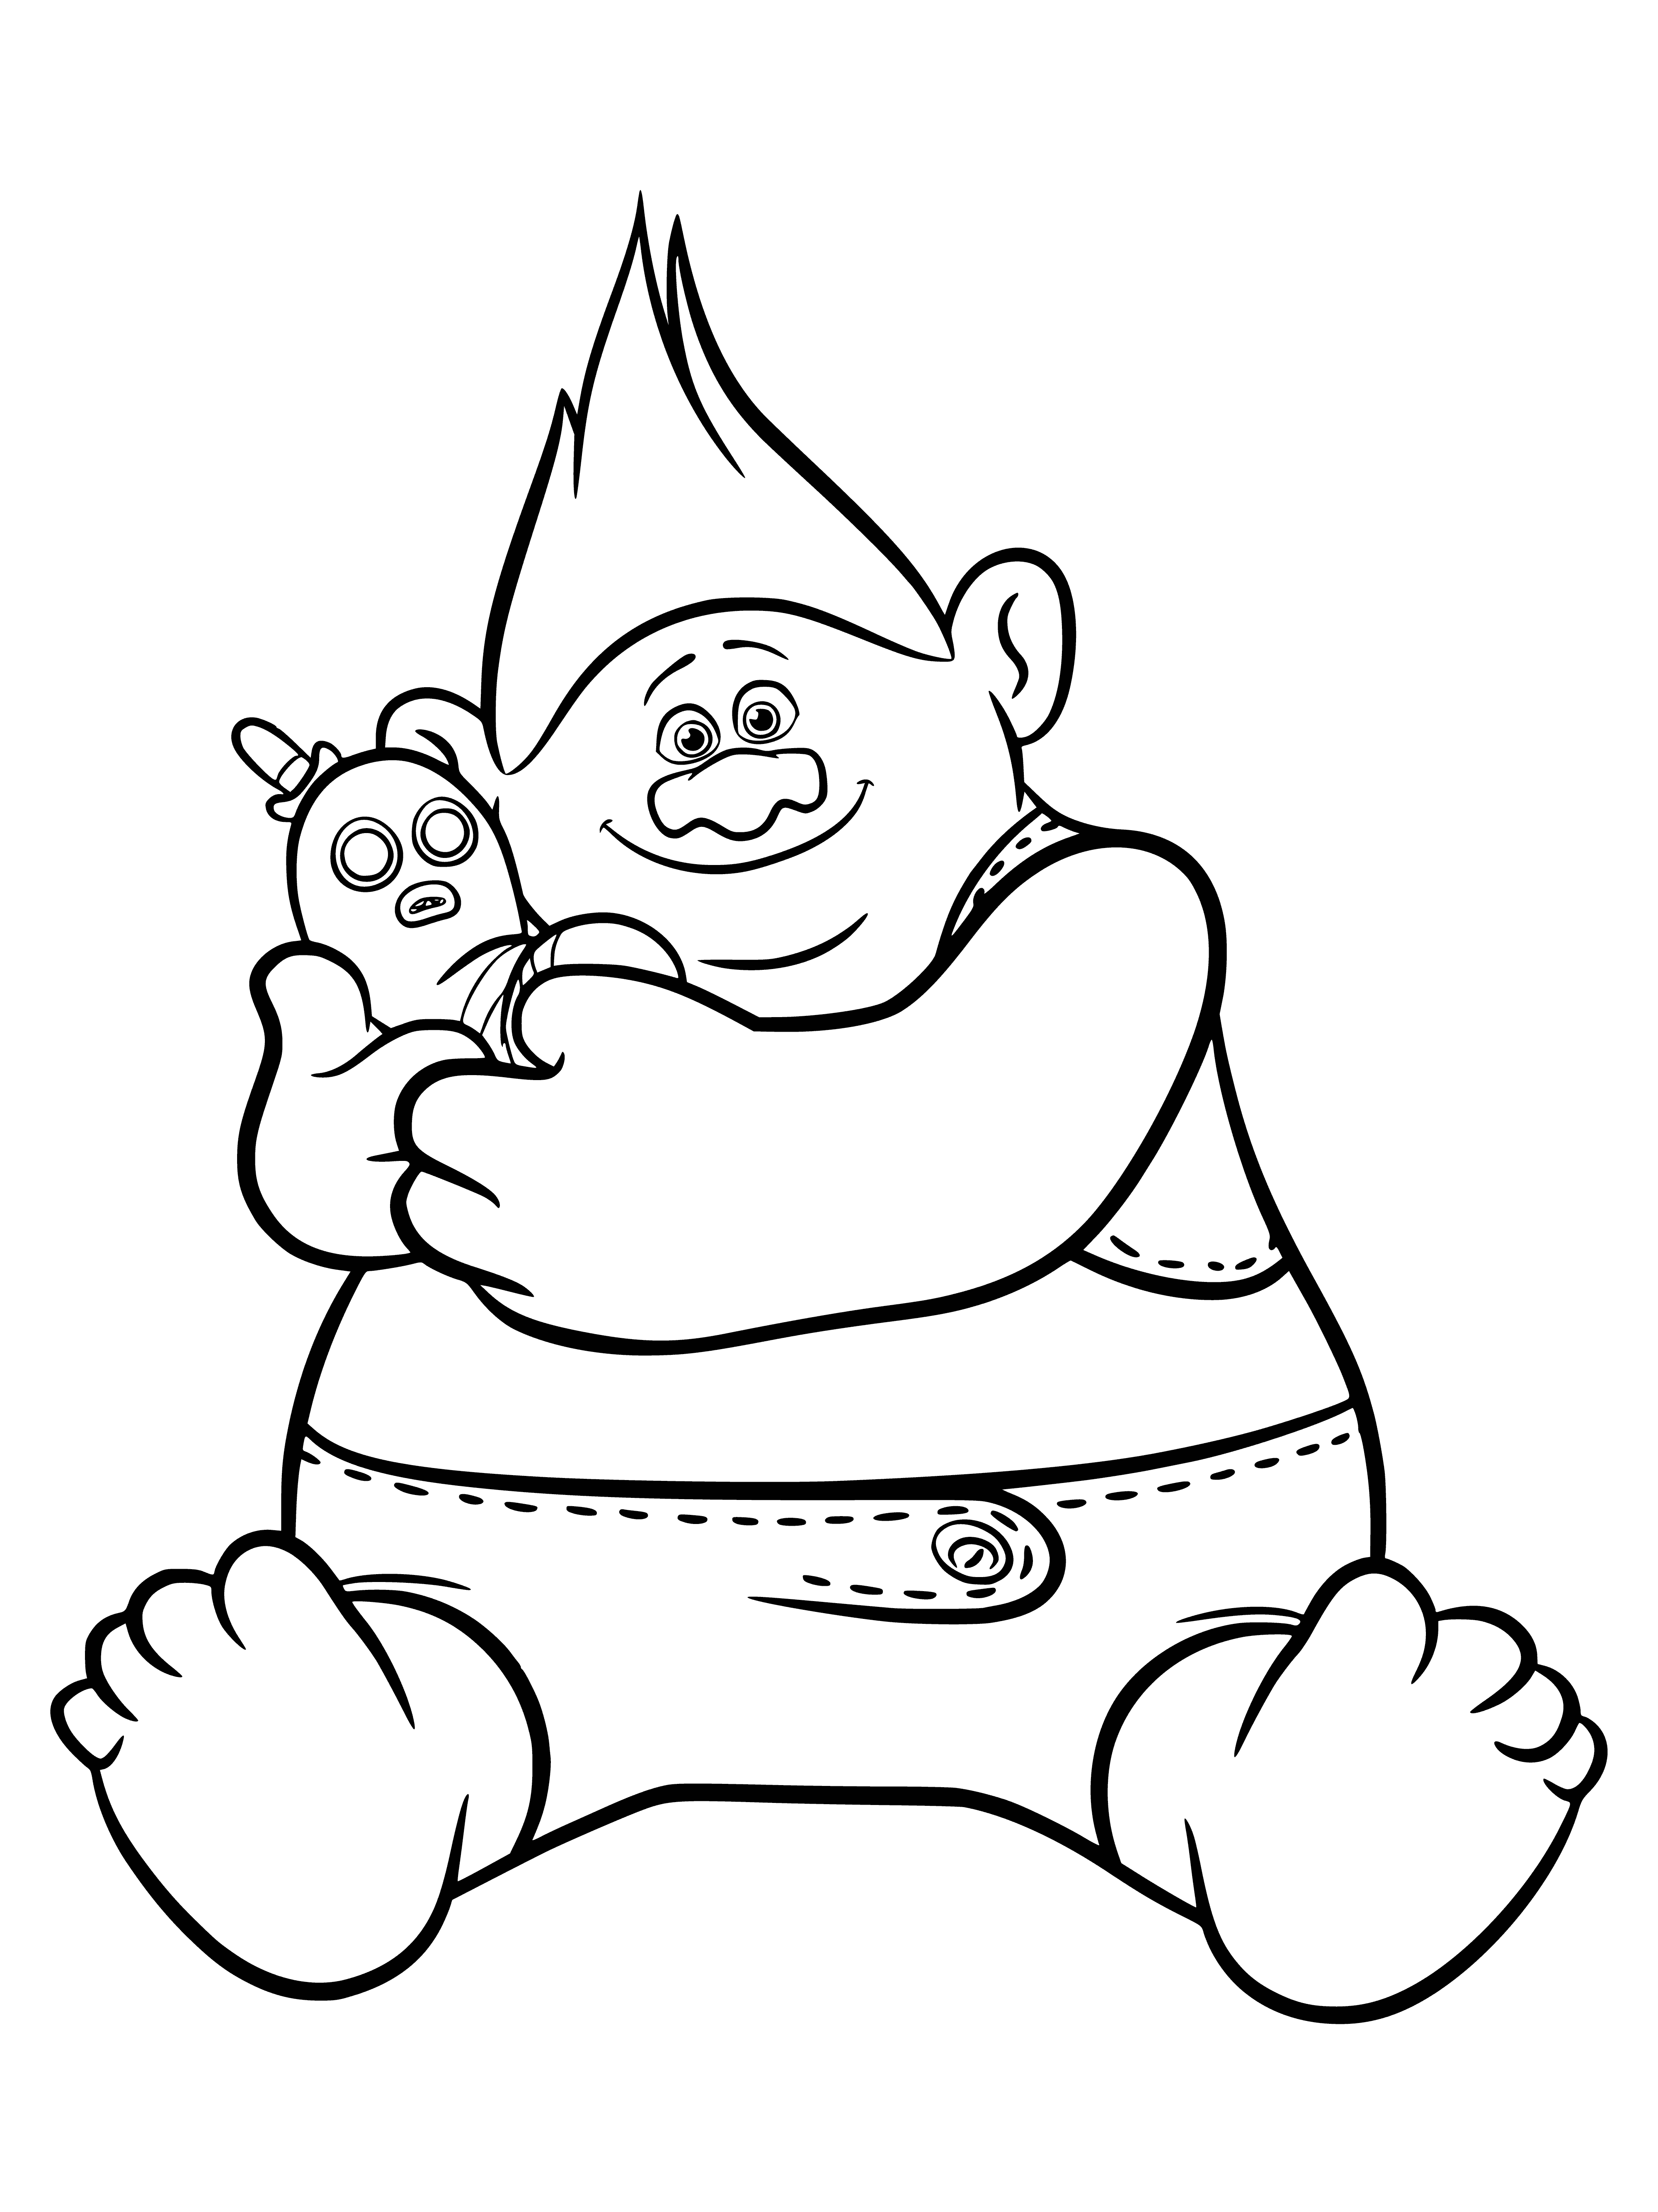 coloring page: Two trolls, one green & one blue, are friends. The green one has yellow hair & brown loincloth; blue one has black hair & red loincloth. #friends #trolls #coloringpage